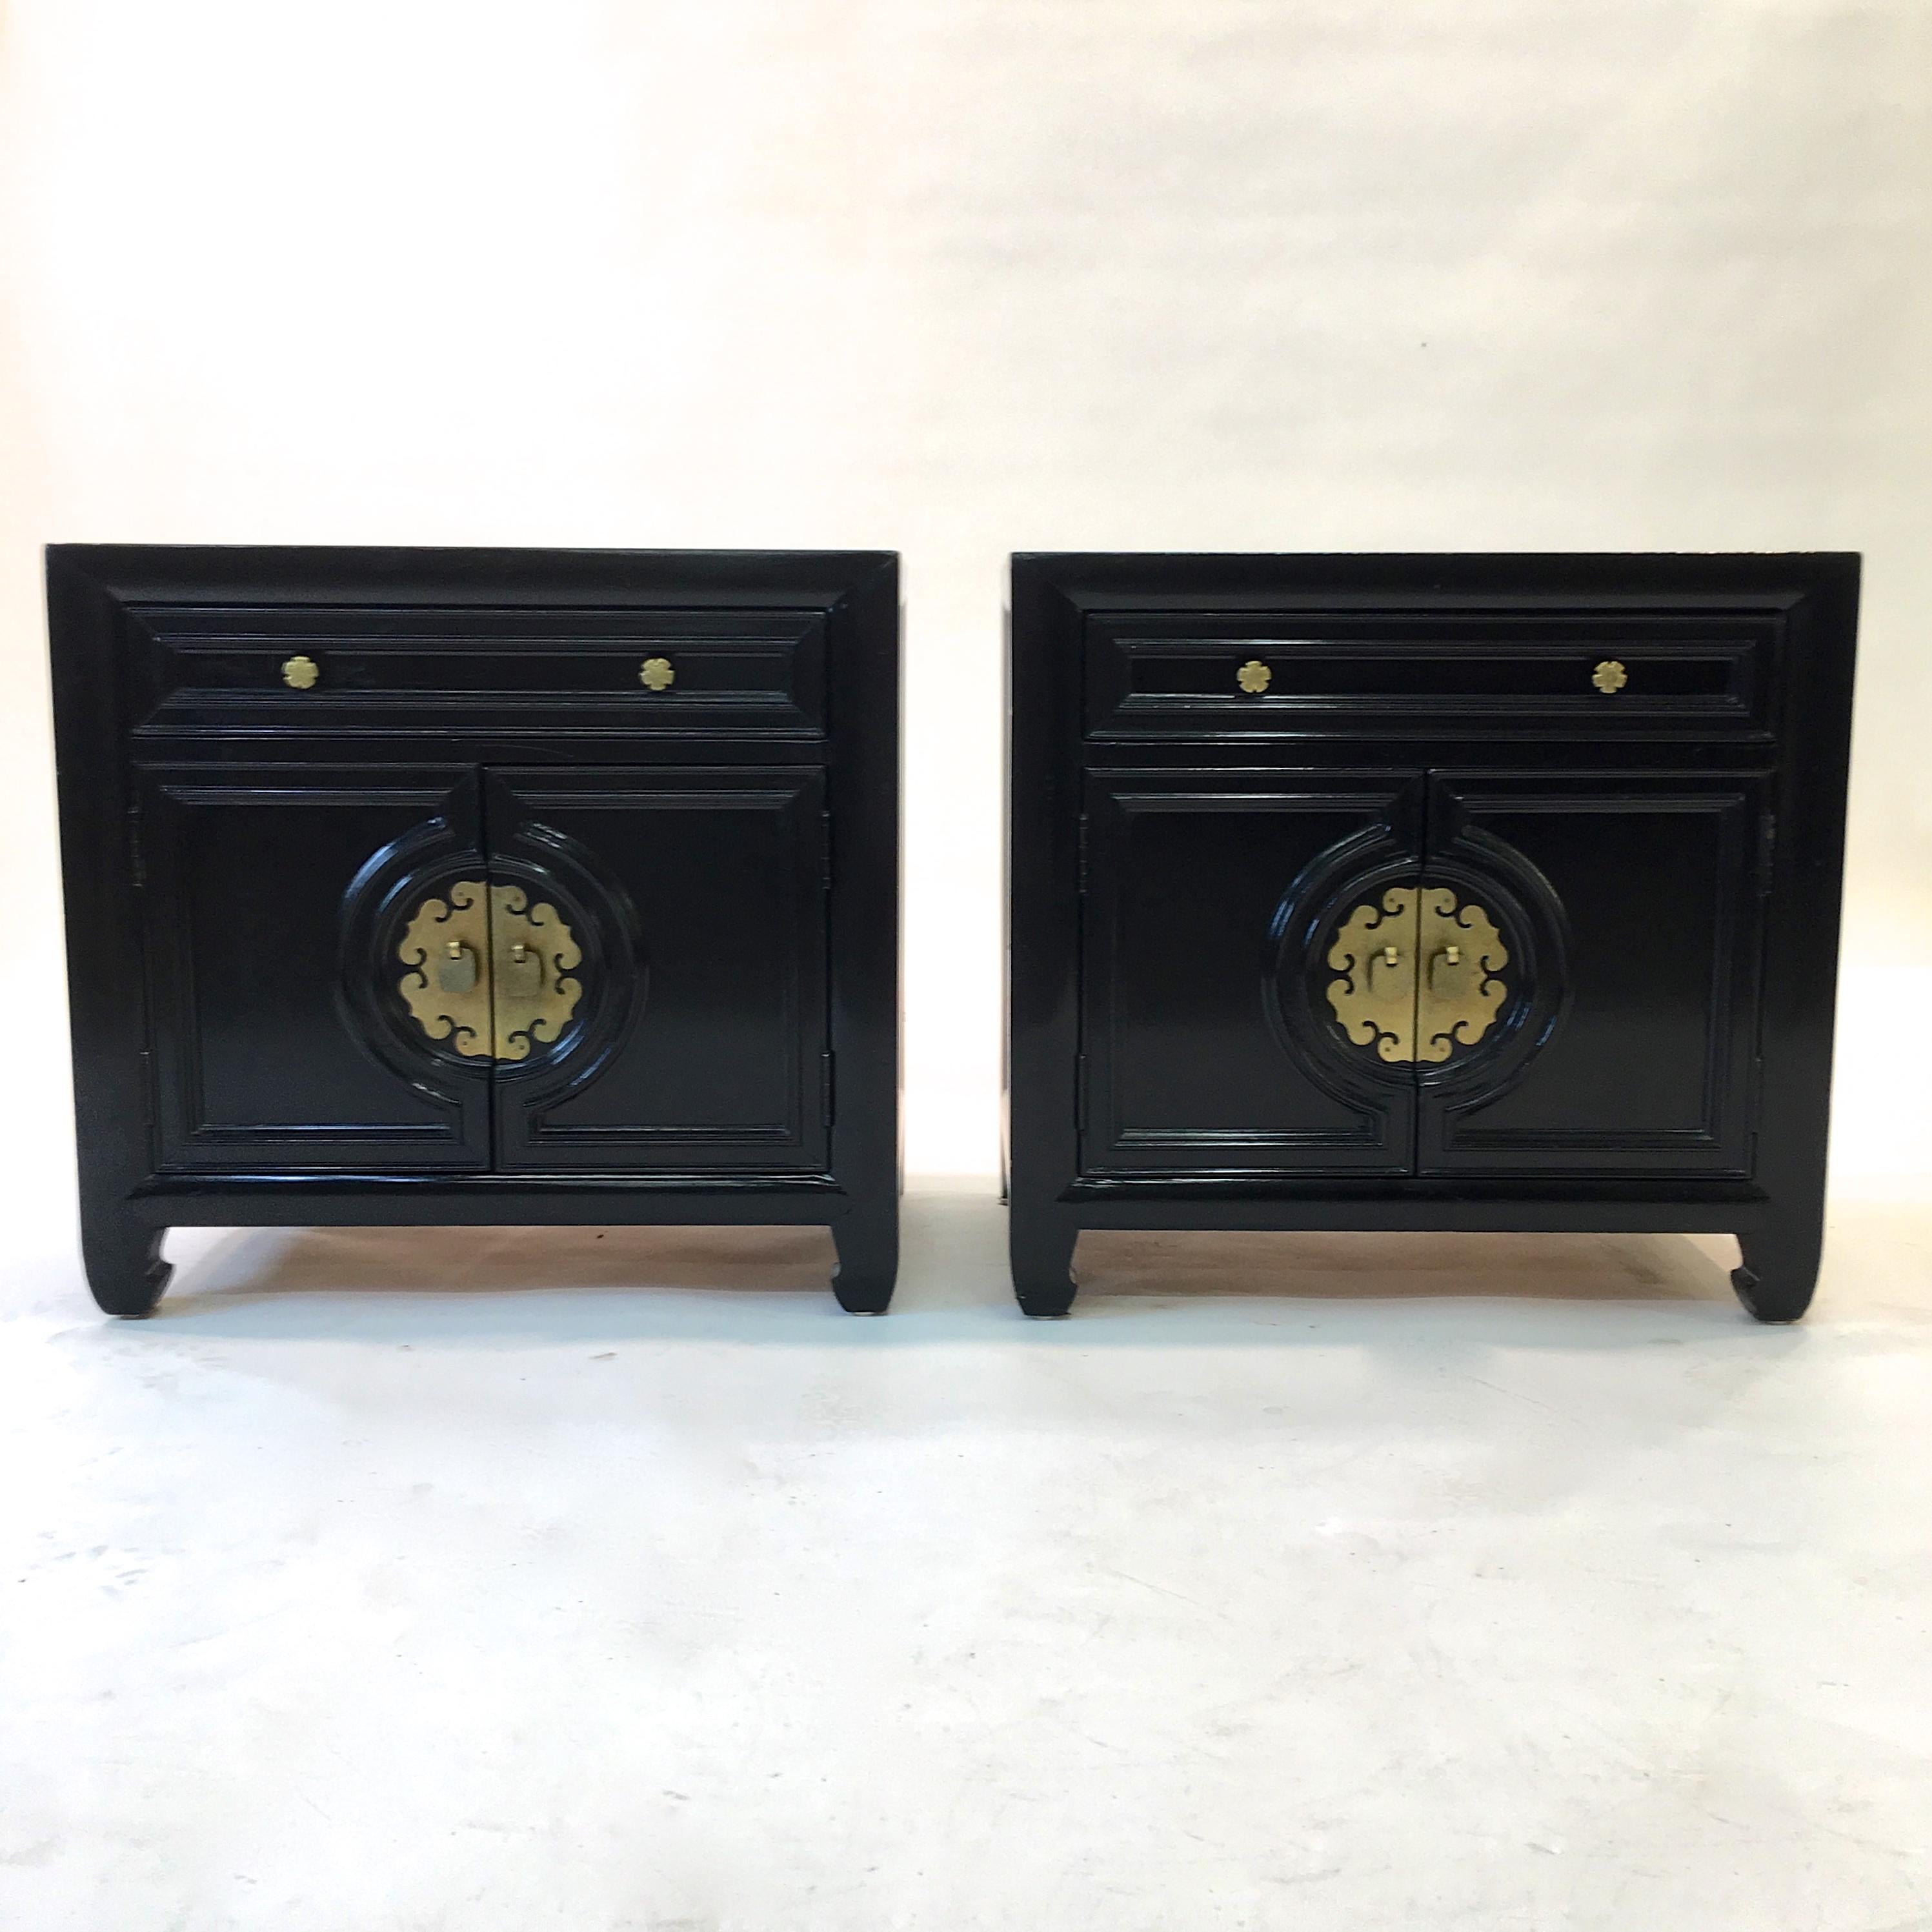 Vintage 1960s black painted pair of nightstands by Century Furniture with solid brass hardware and central oriental motif brass medallion. Two double doors below a single drawer with Century brand mark. The doors open to reveal an open compartment.